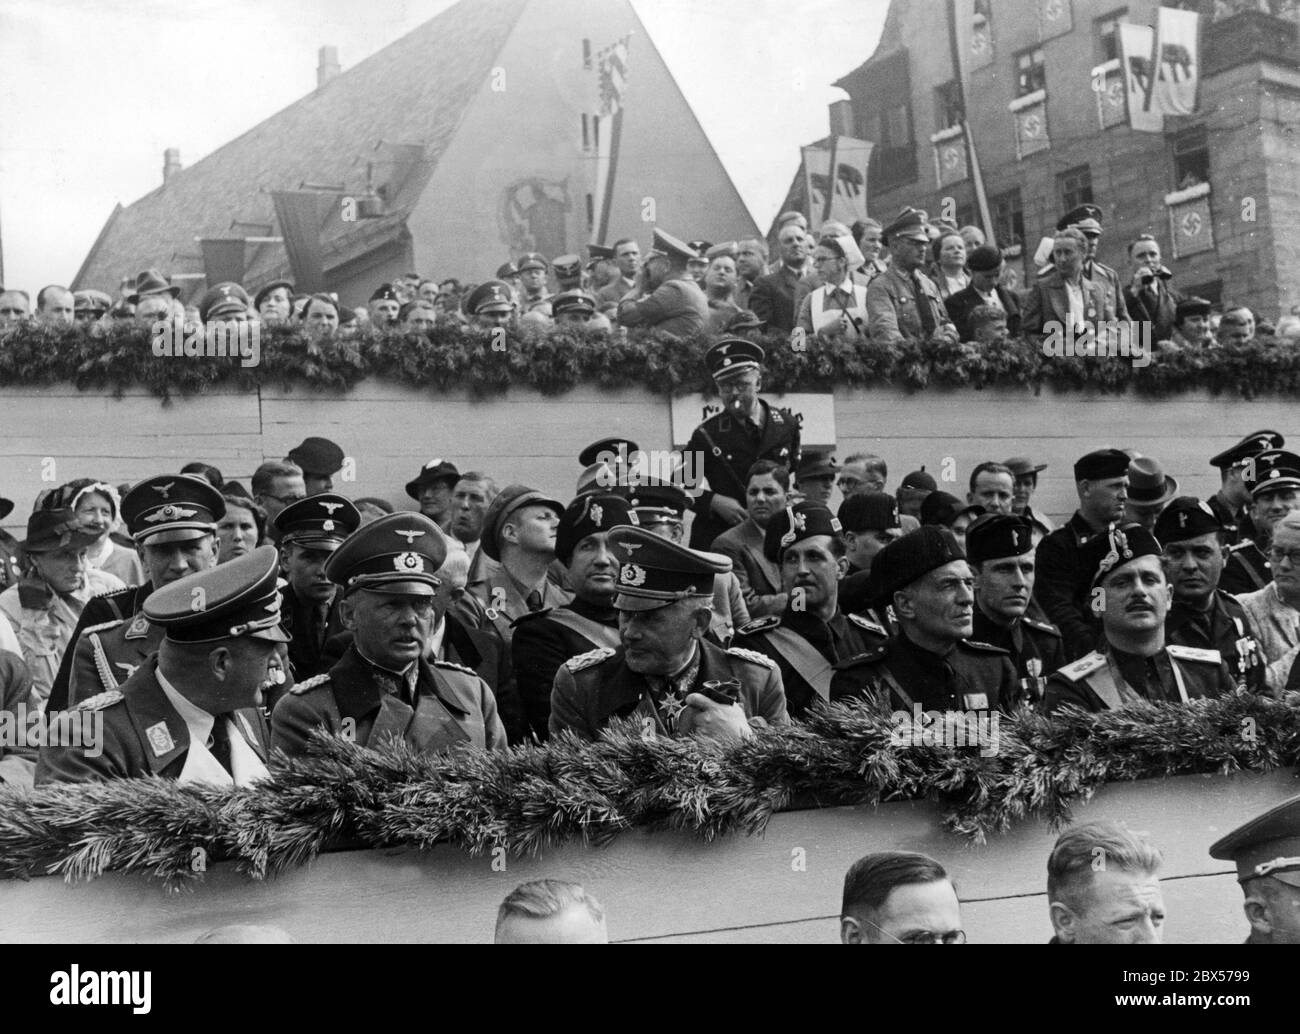 View of the tribune of the guests of honour, during the parade on the so-called Adolf-Hitler-Platz in Nuremberg. Below from left to right: General der Flieger Erhard Milch, Colonel General Freiherr Werner von Fritsch, Field Marshal General Werner von Blomberg, and Italian guests, including General Bastianini and workers' leader Cianetti. Stock Photo